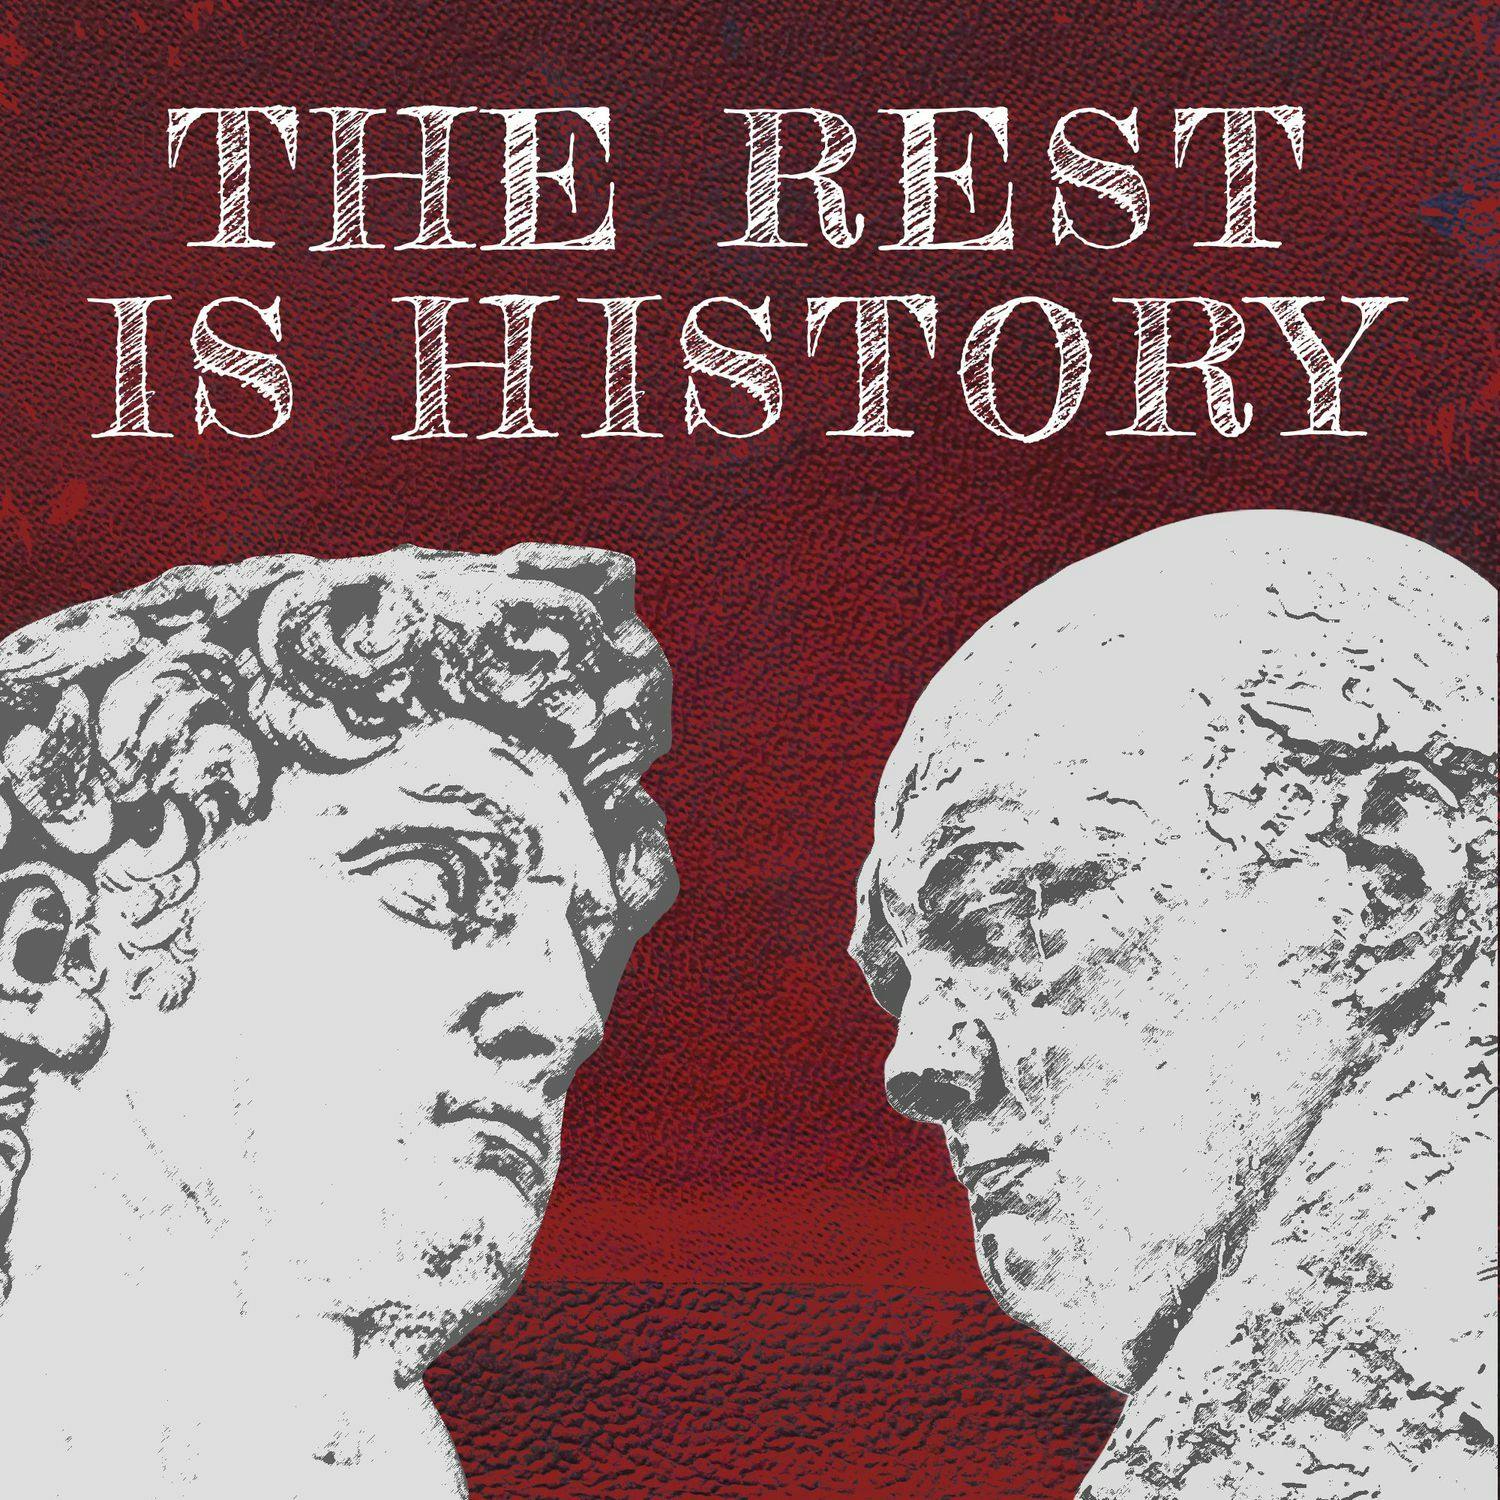 7. The Lessons of History